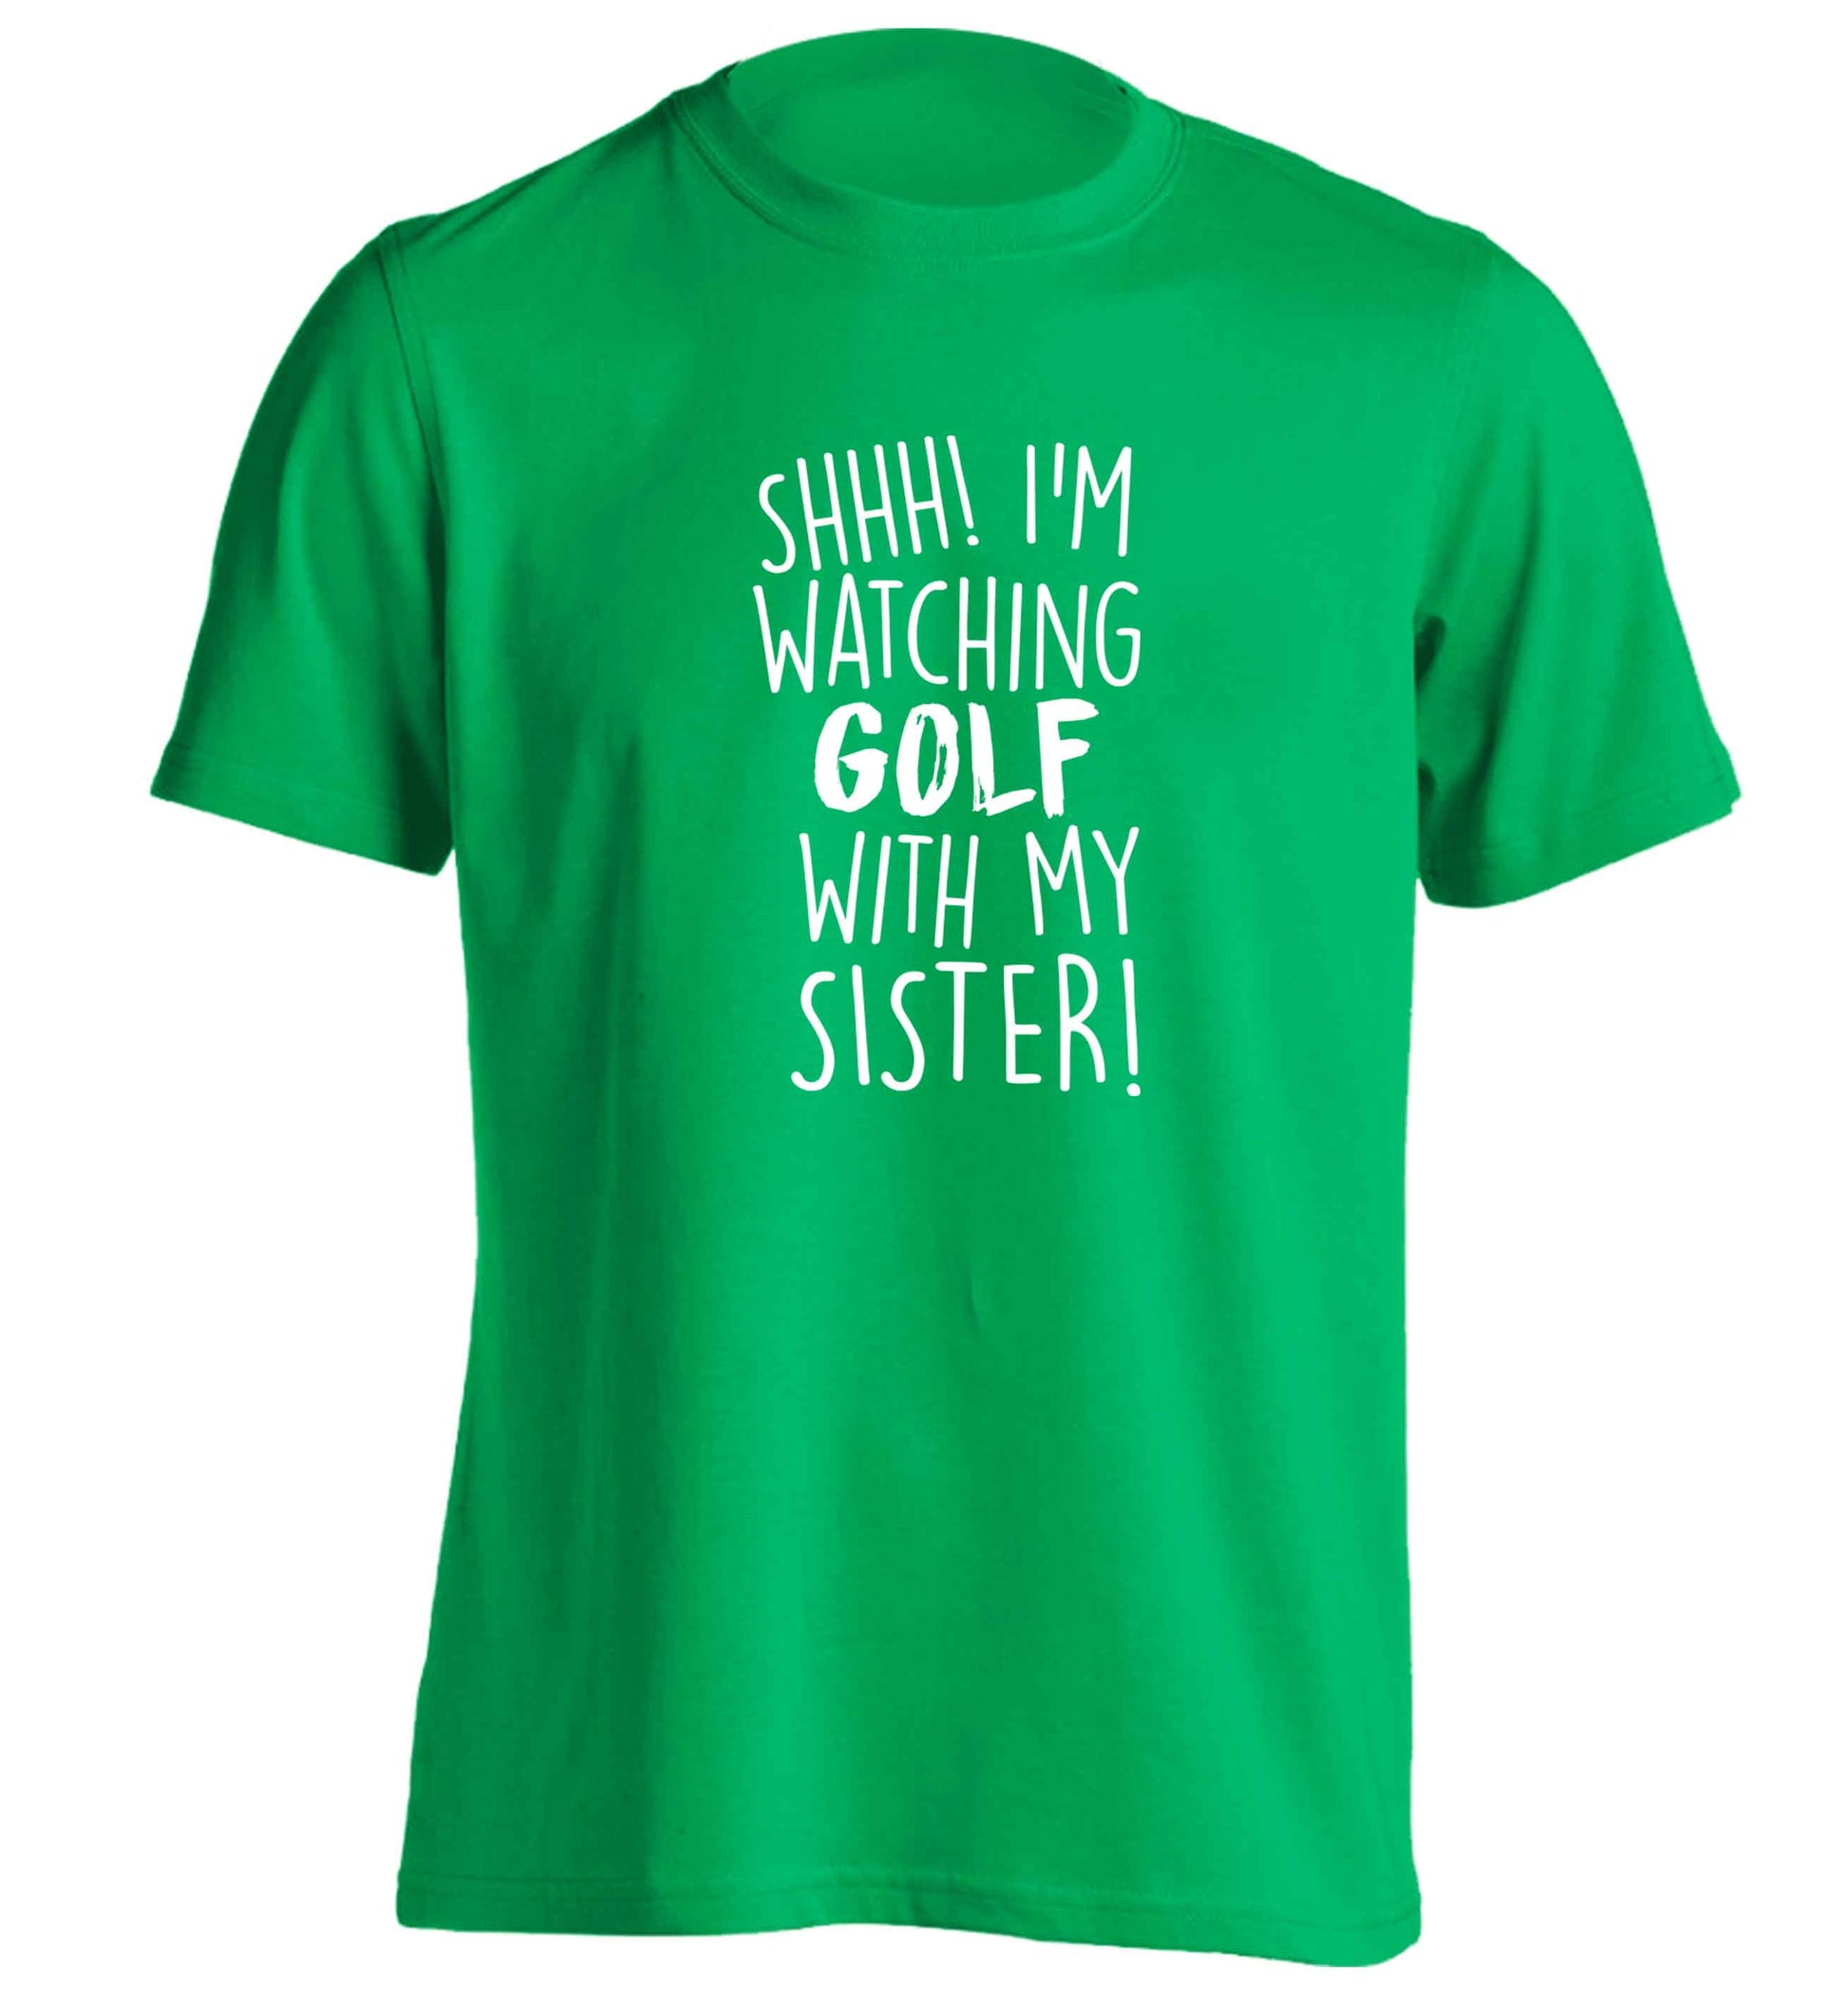 Shh I'm watching golf with my sister adults unisex green Tshirt 2XL